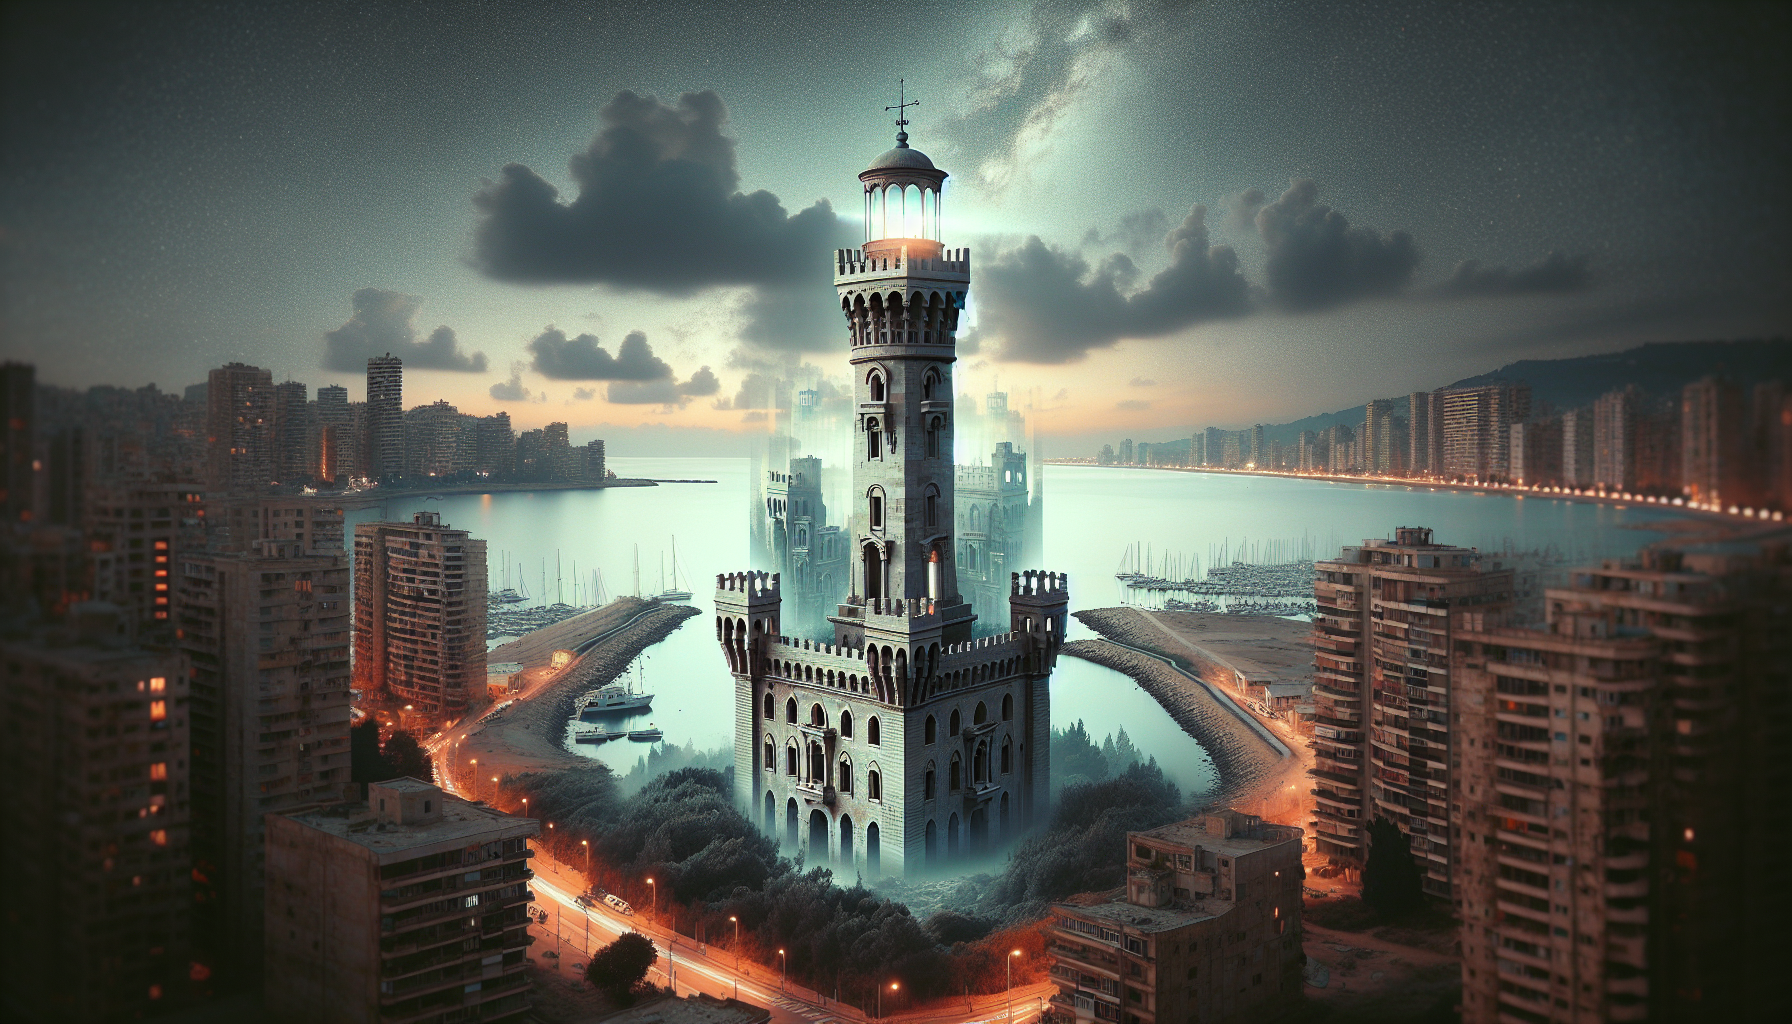 discover the historical mystery of the lost lighthouse of pharos in alexandria and explore whether it still stands today. uncover the secrets of this ancient wonder and its enduring legacy.